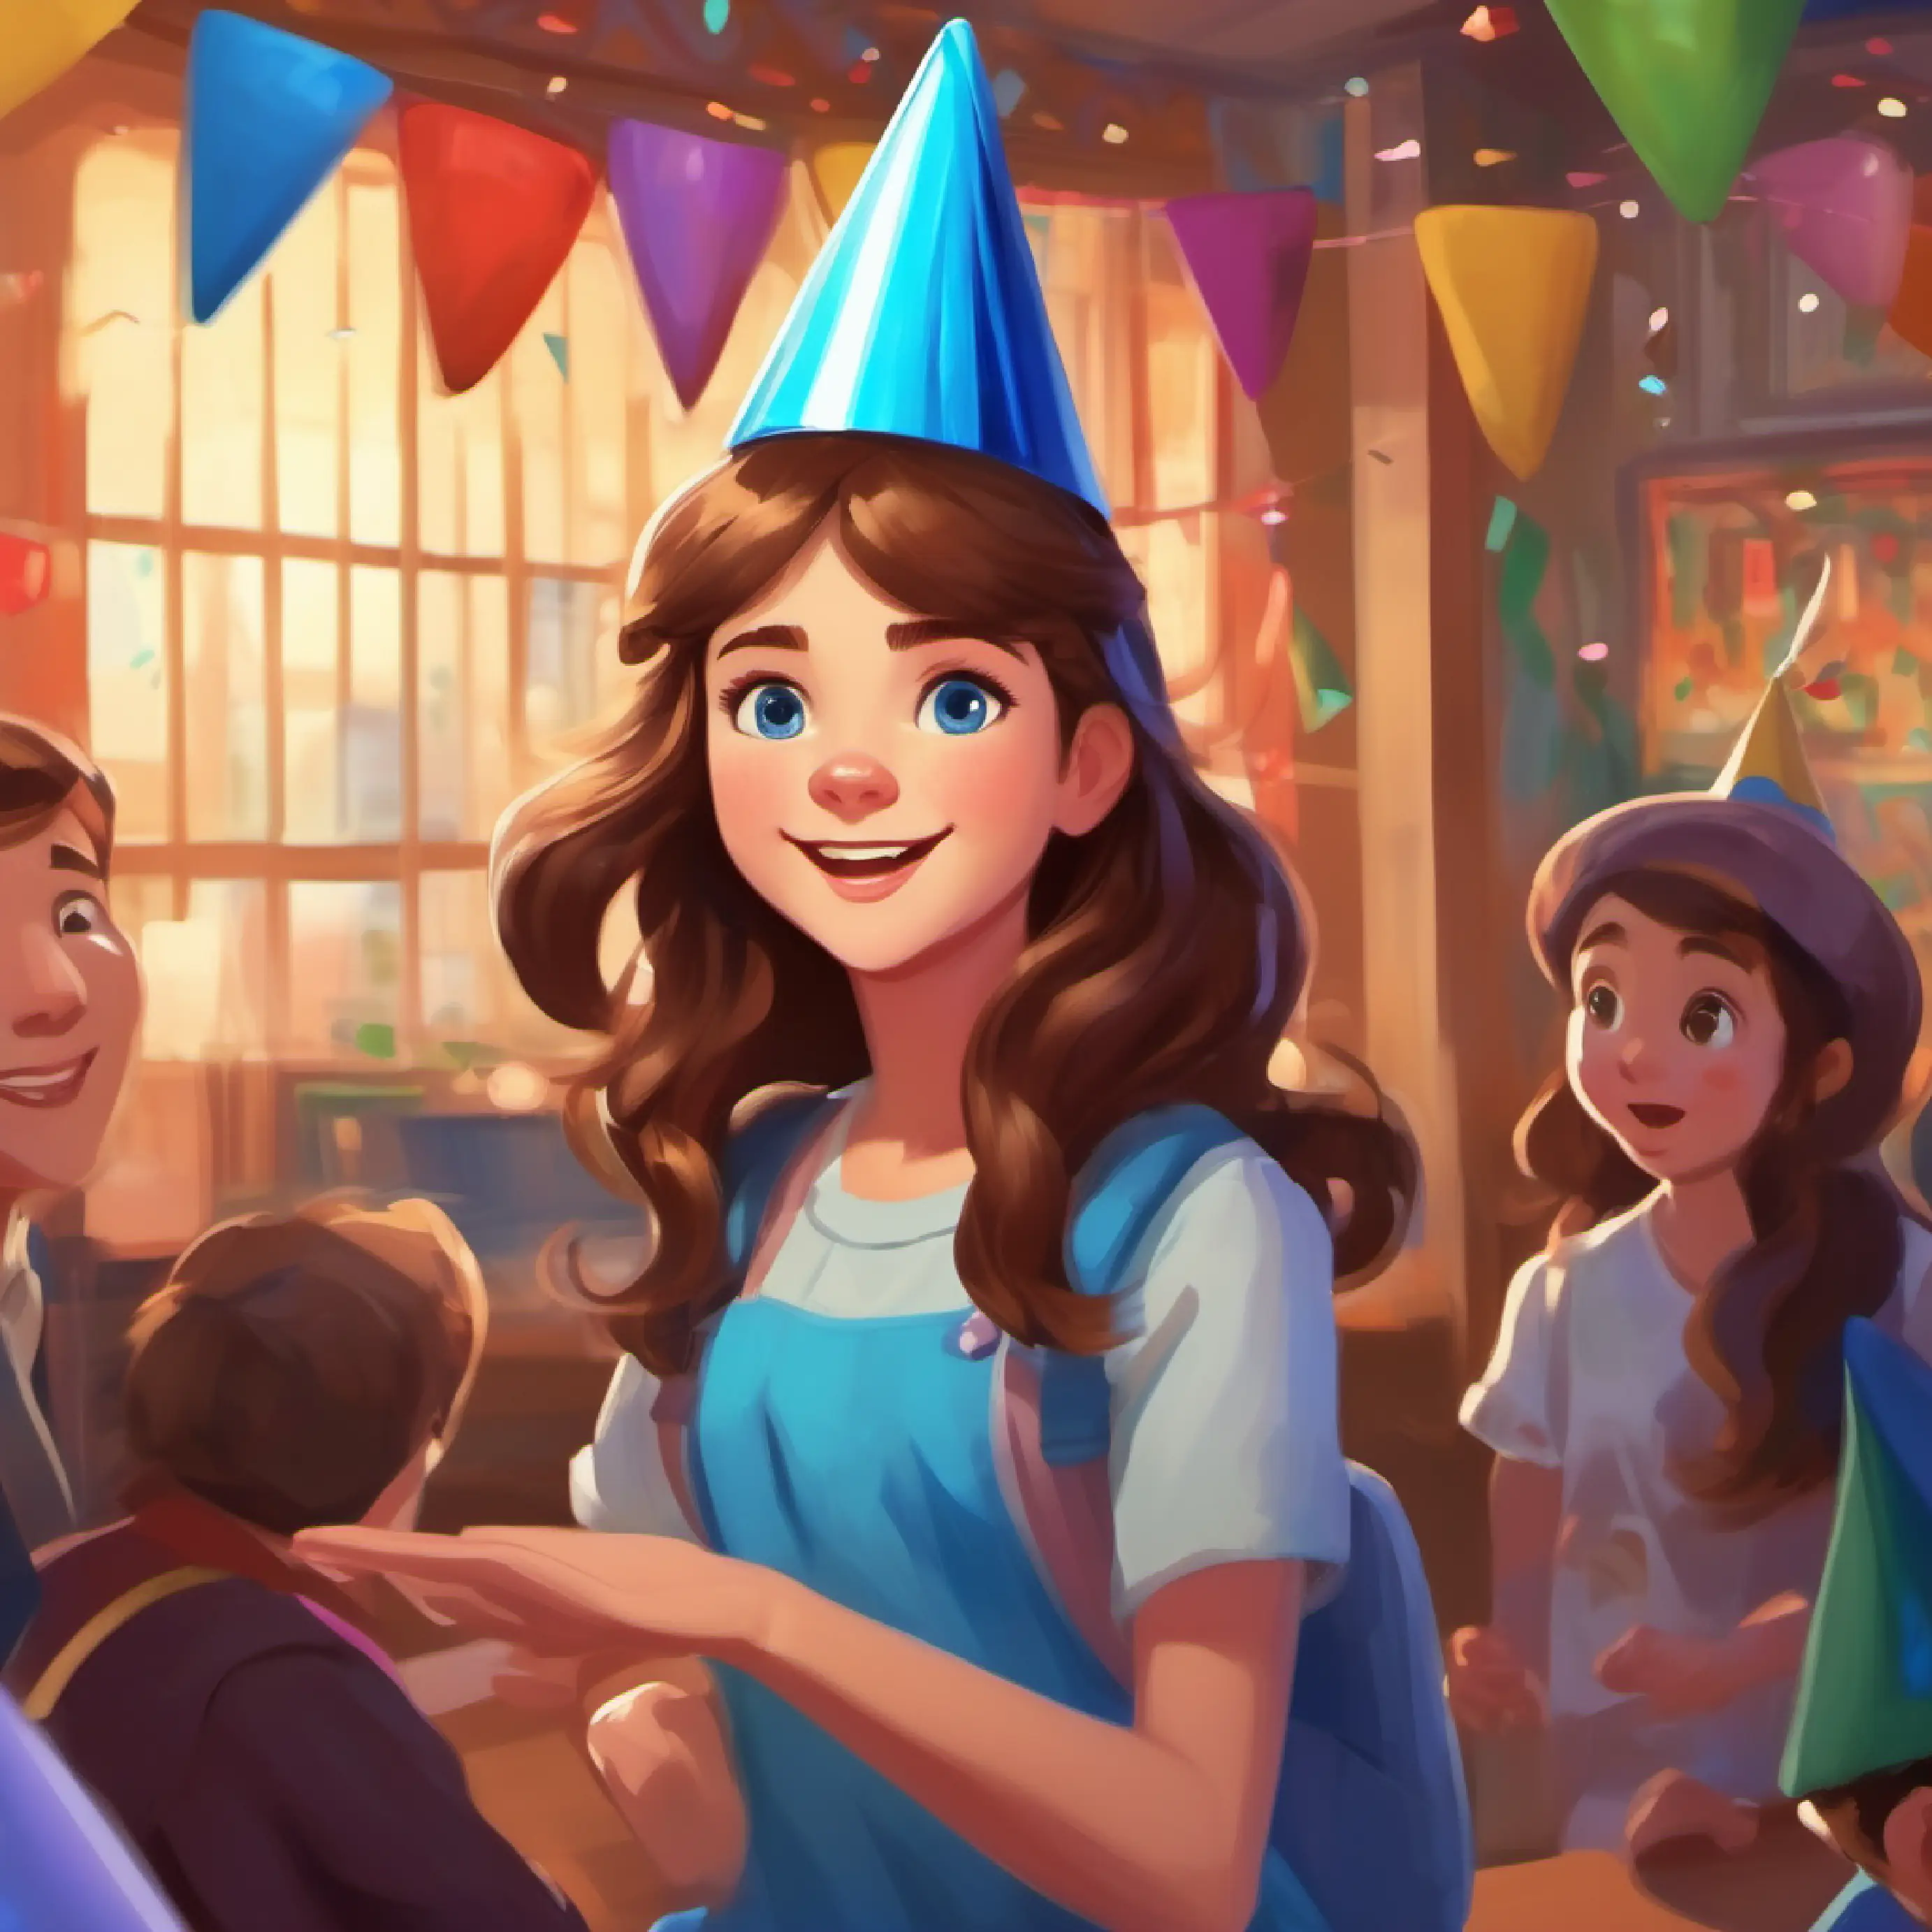 Introduction to Girl with brown hair, blue eyes, wearing a party hat and her excitement, indoors.